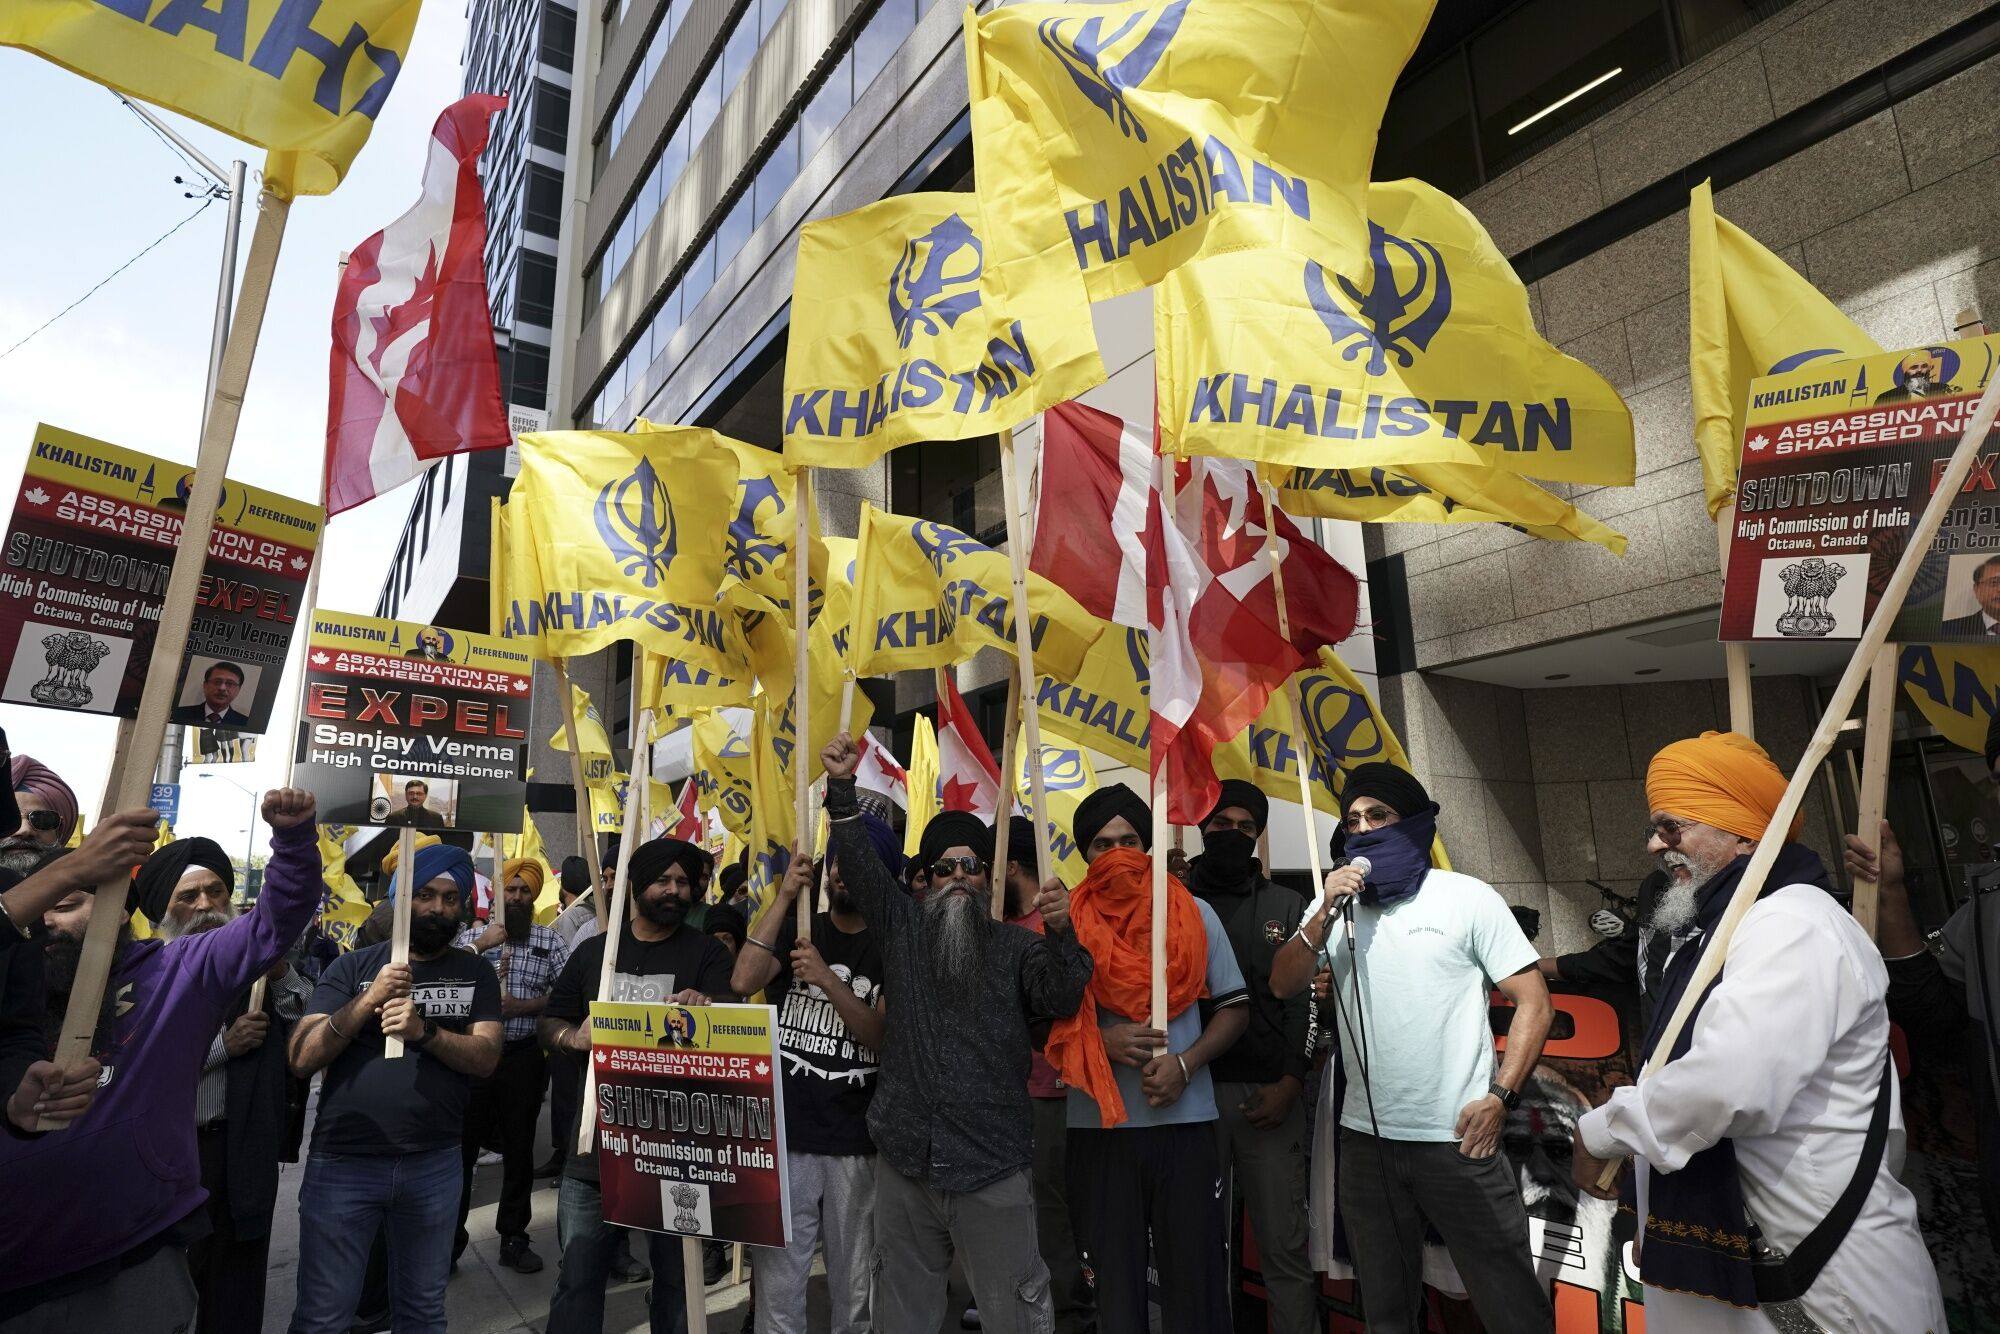 Sikh demonstrators protest outside the Indian consulate in Toronto, Canada, on September 25. Photo: Bloomberg